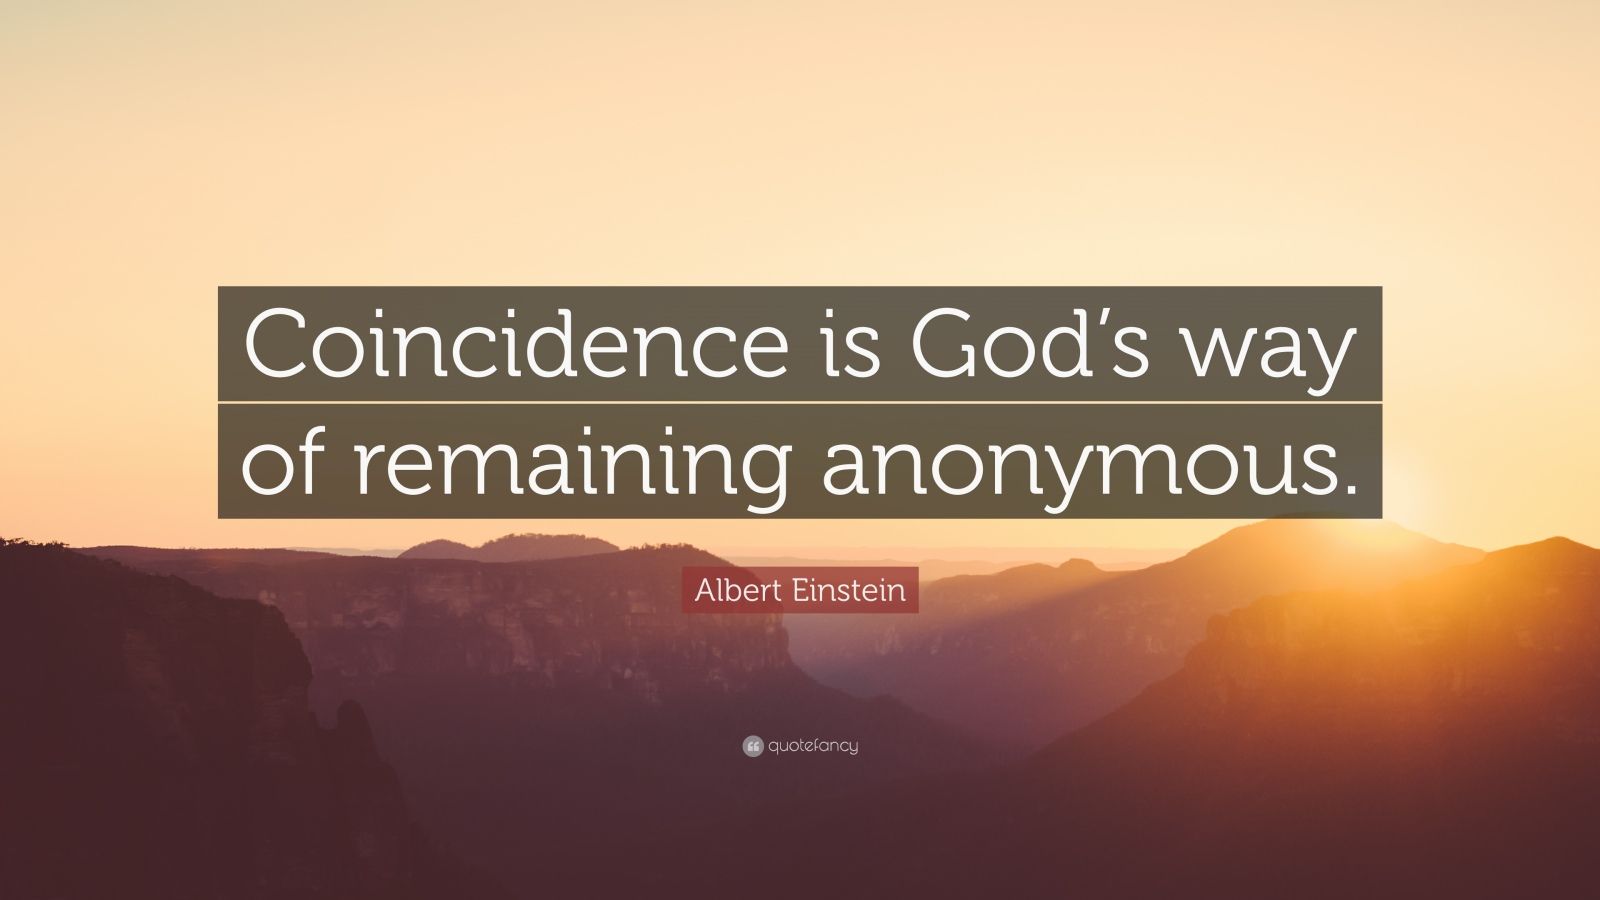 28609 Albert Einstein Quote Coincidence is God s way of remaining